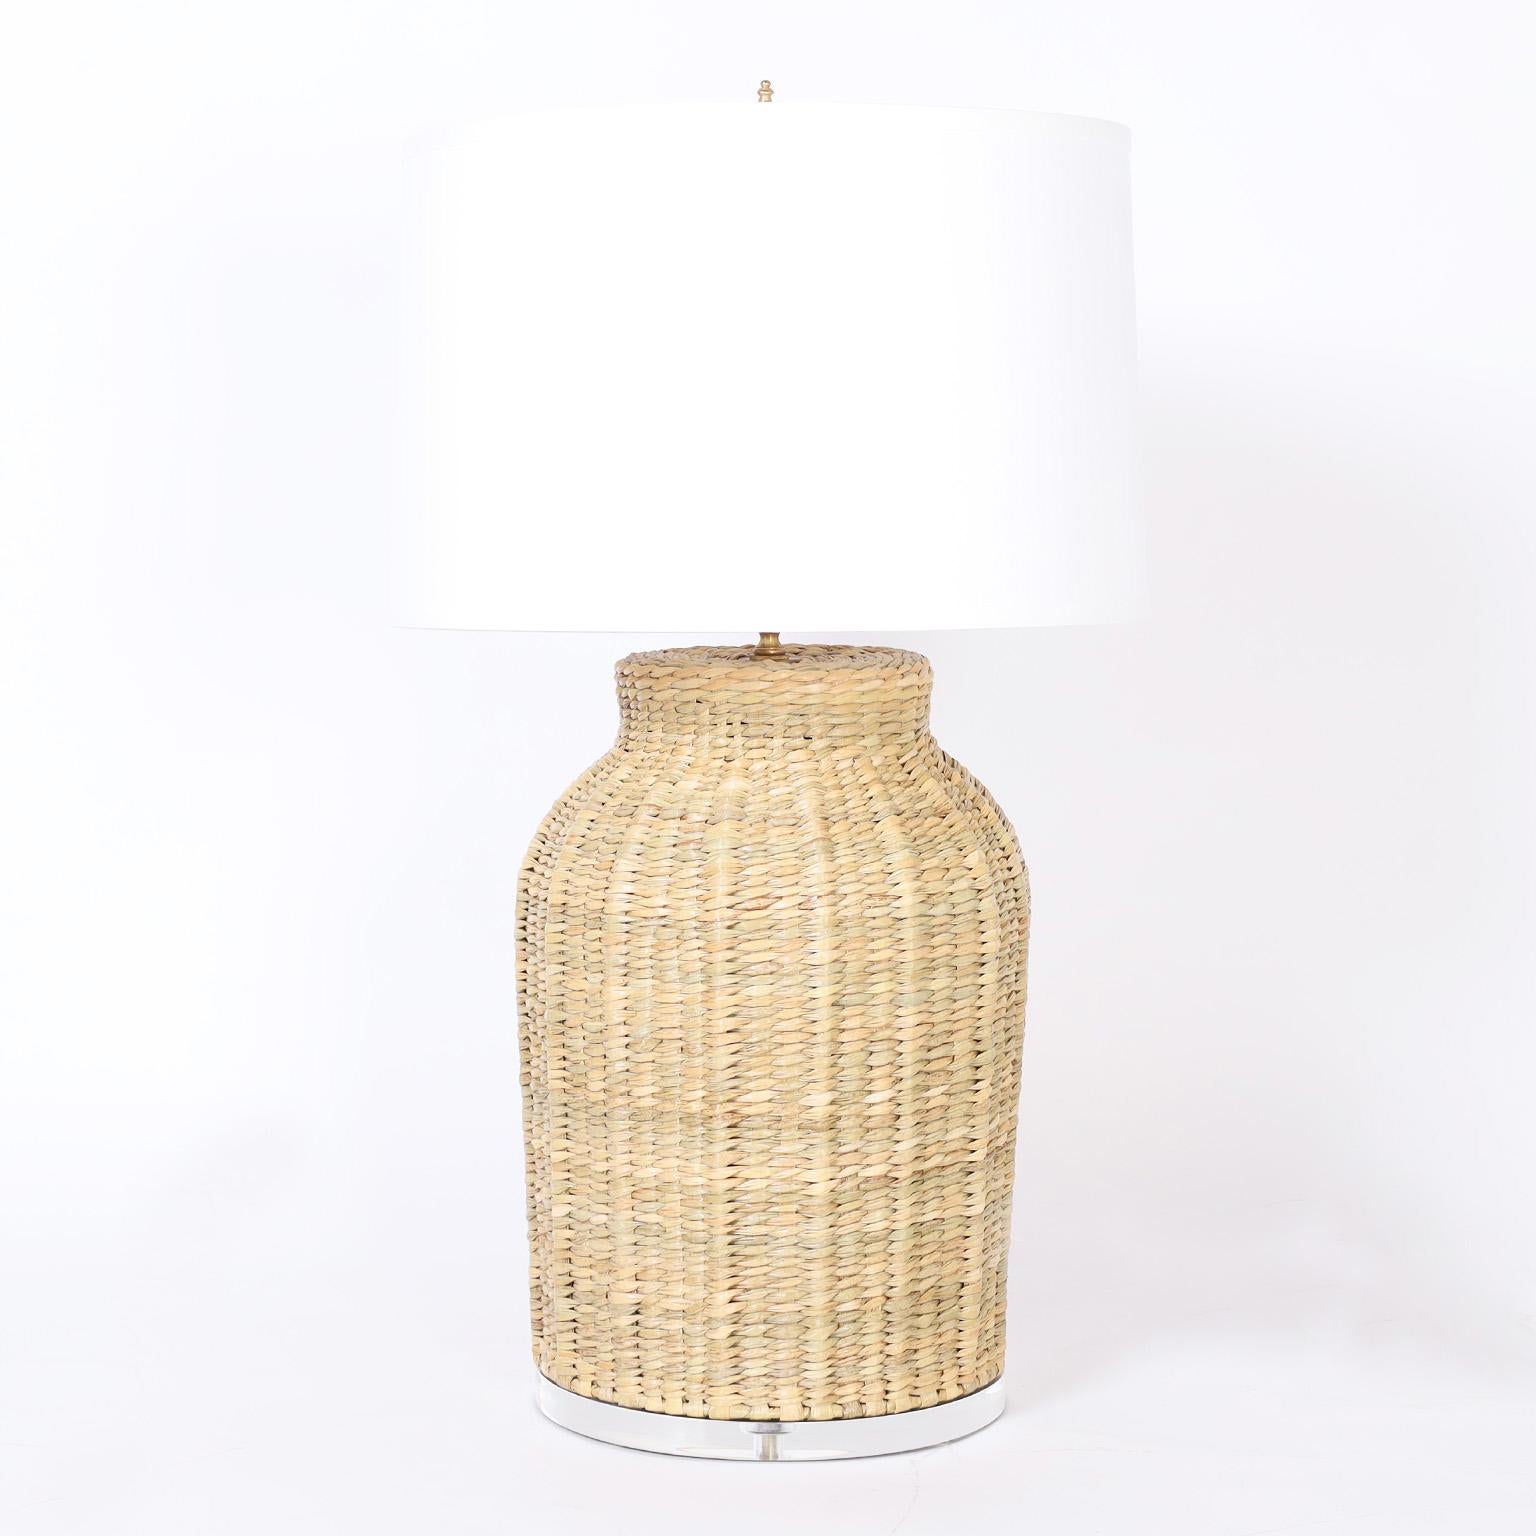 Asian modern style table lamps hand crafted in wicker or reed in a classic bottle form, in a bold scale, presented on lucite bases, from the FS Flores Collection designed and offered exclusively by F.S. Henemader Antiques.